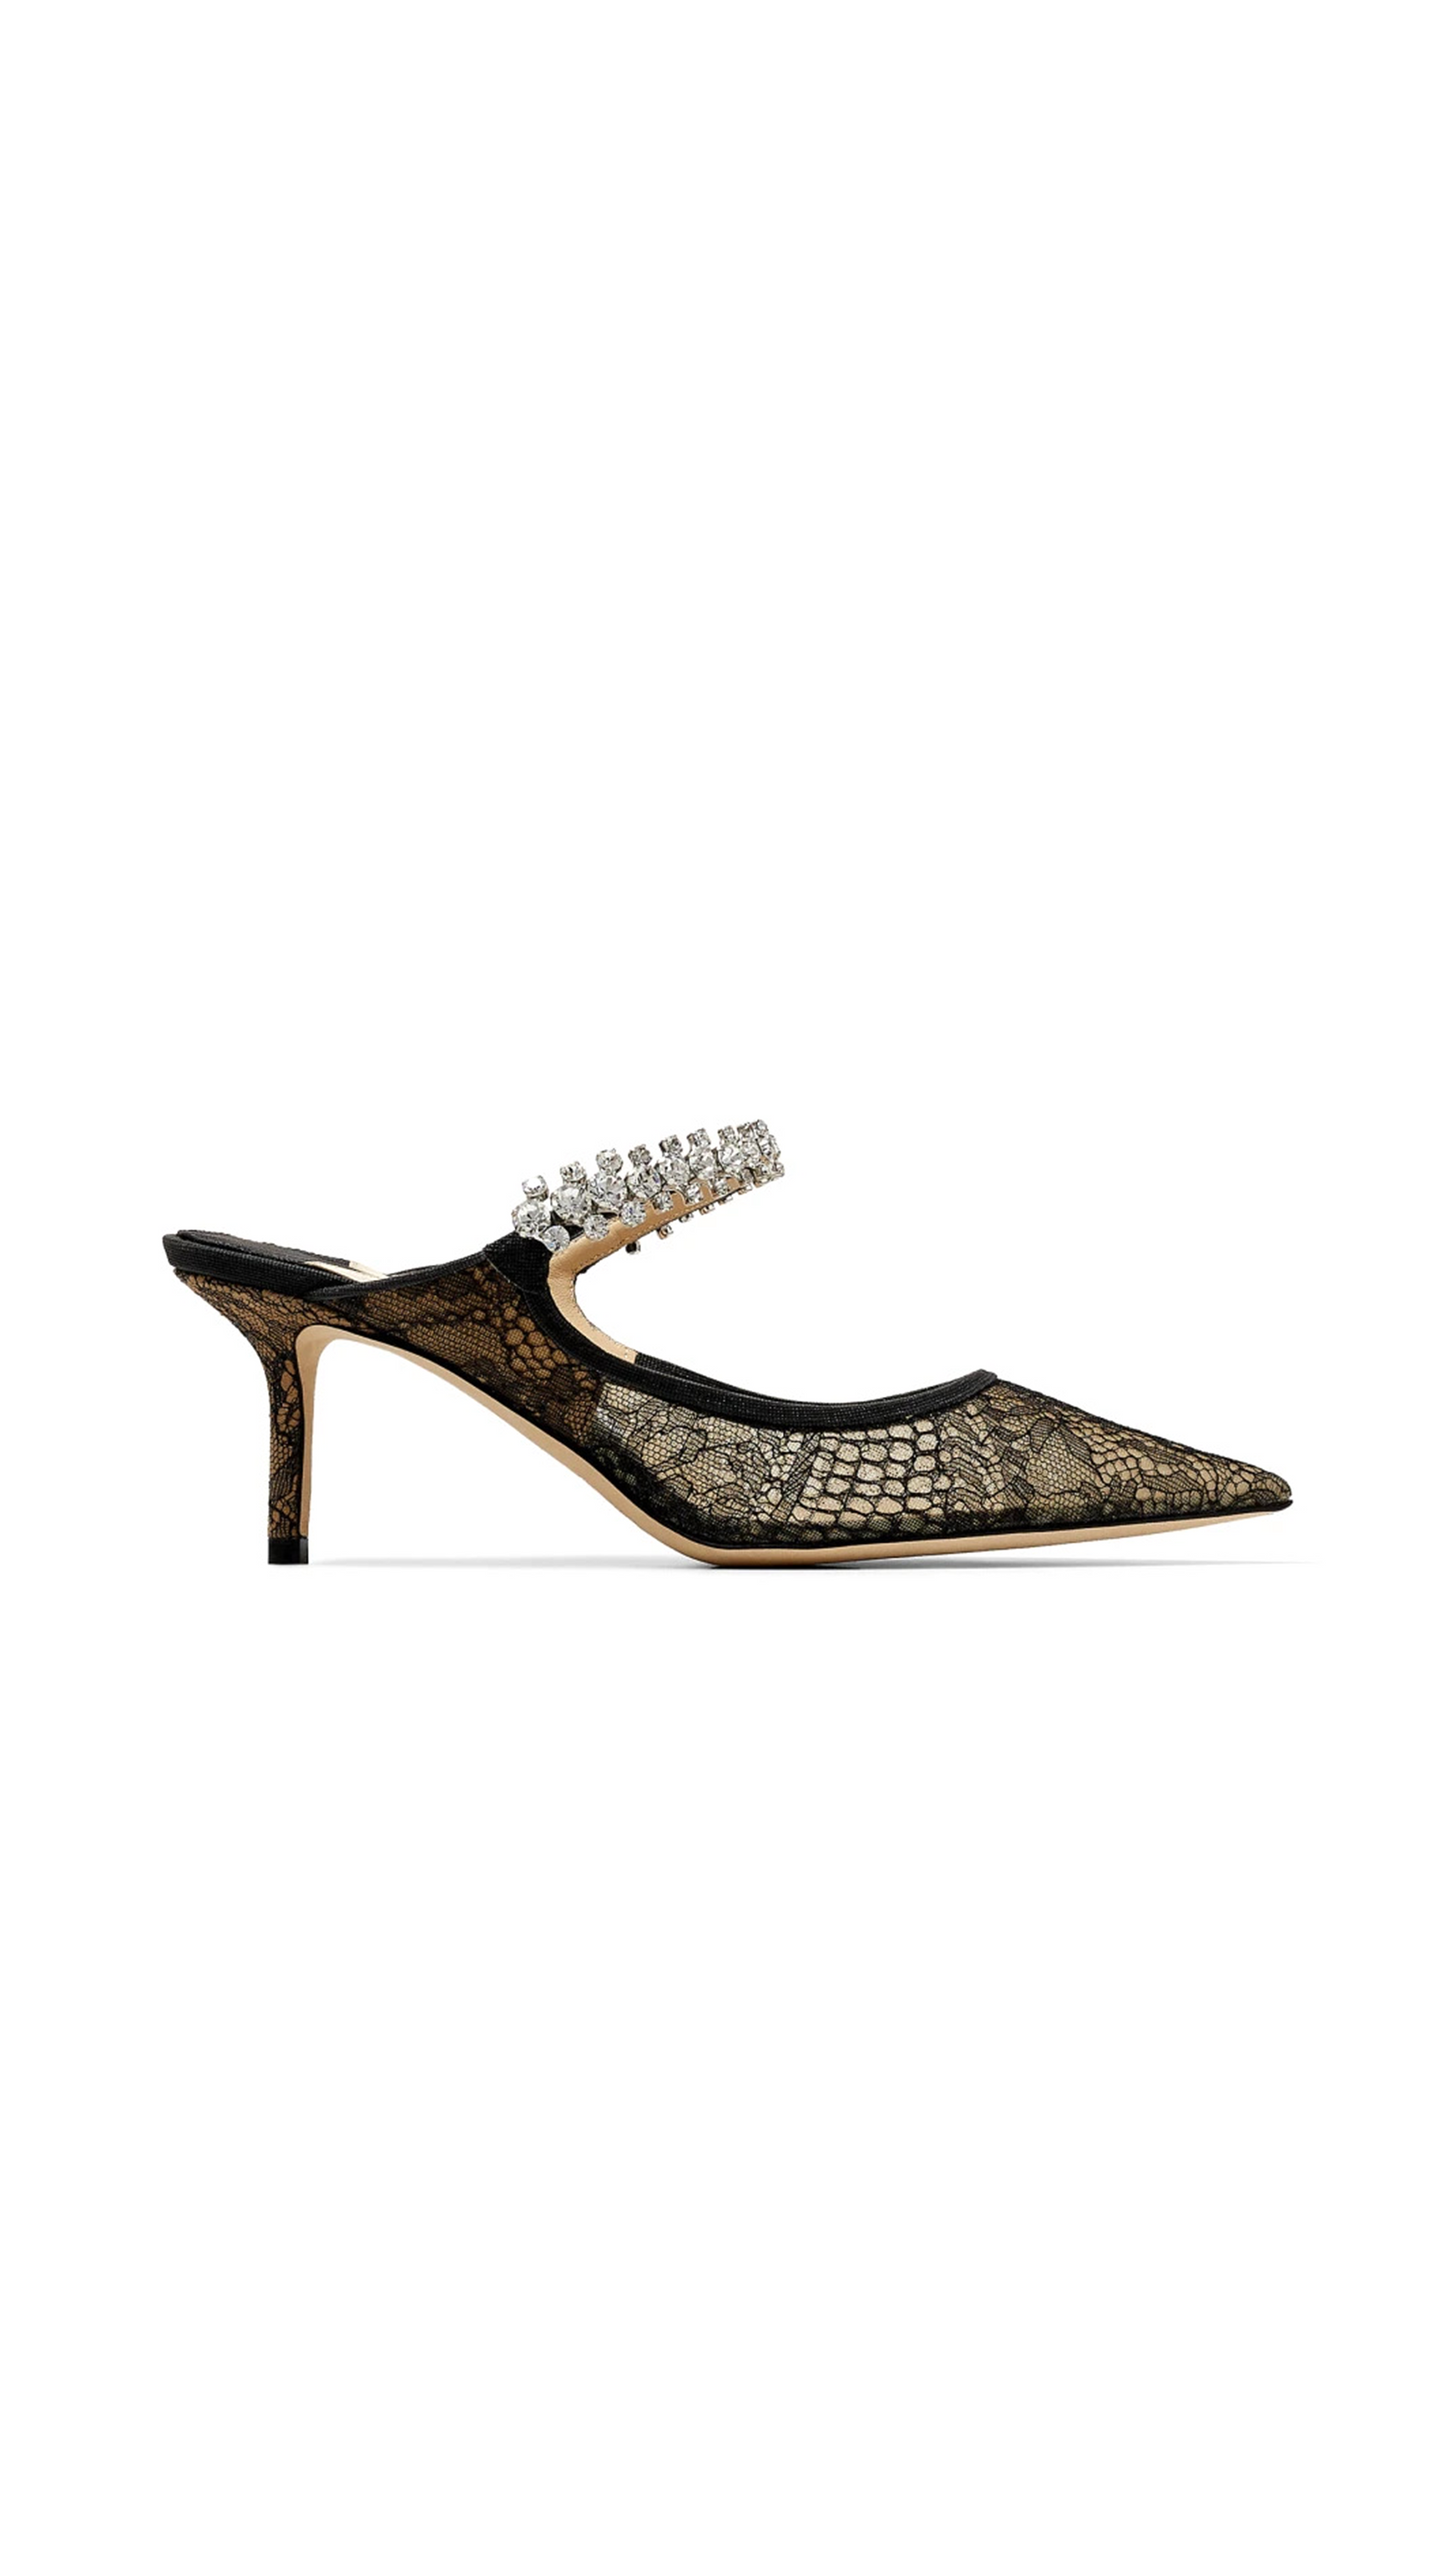 Bing 65 Metallic Lace and Glitter Pumps with Crystal Strap - Black